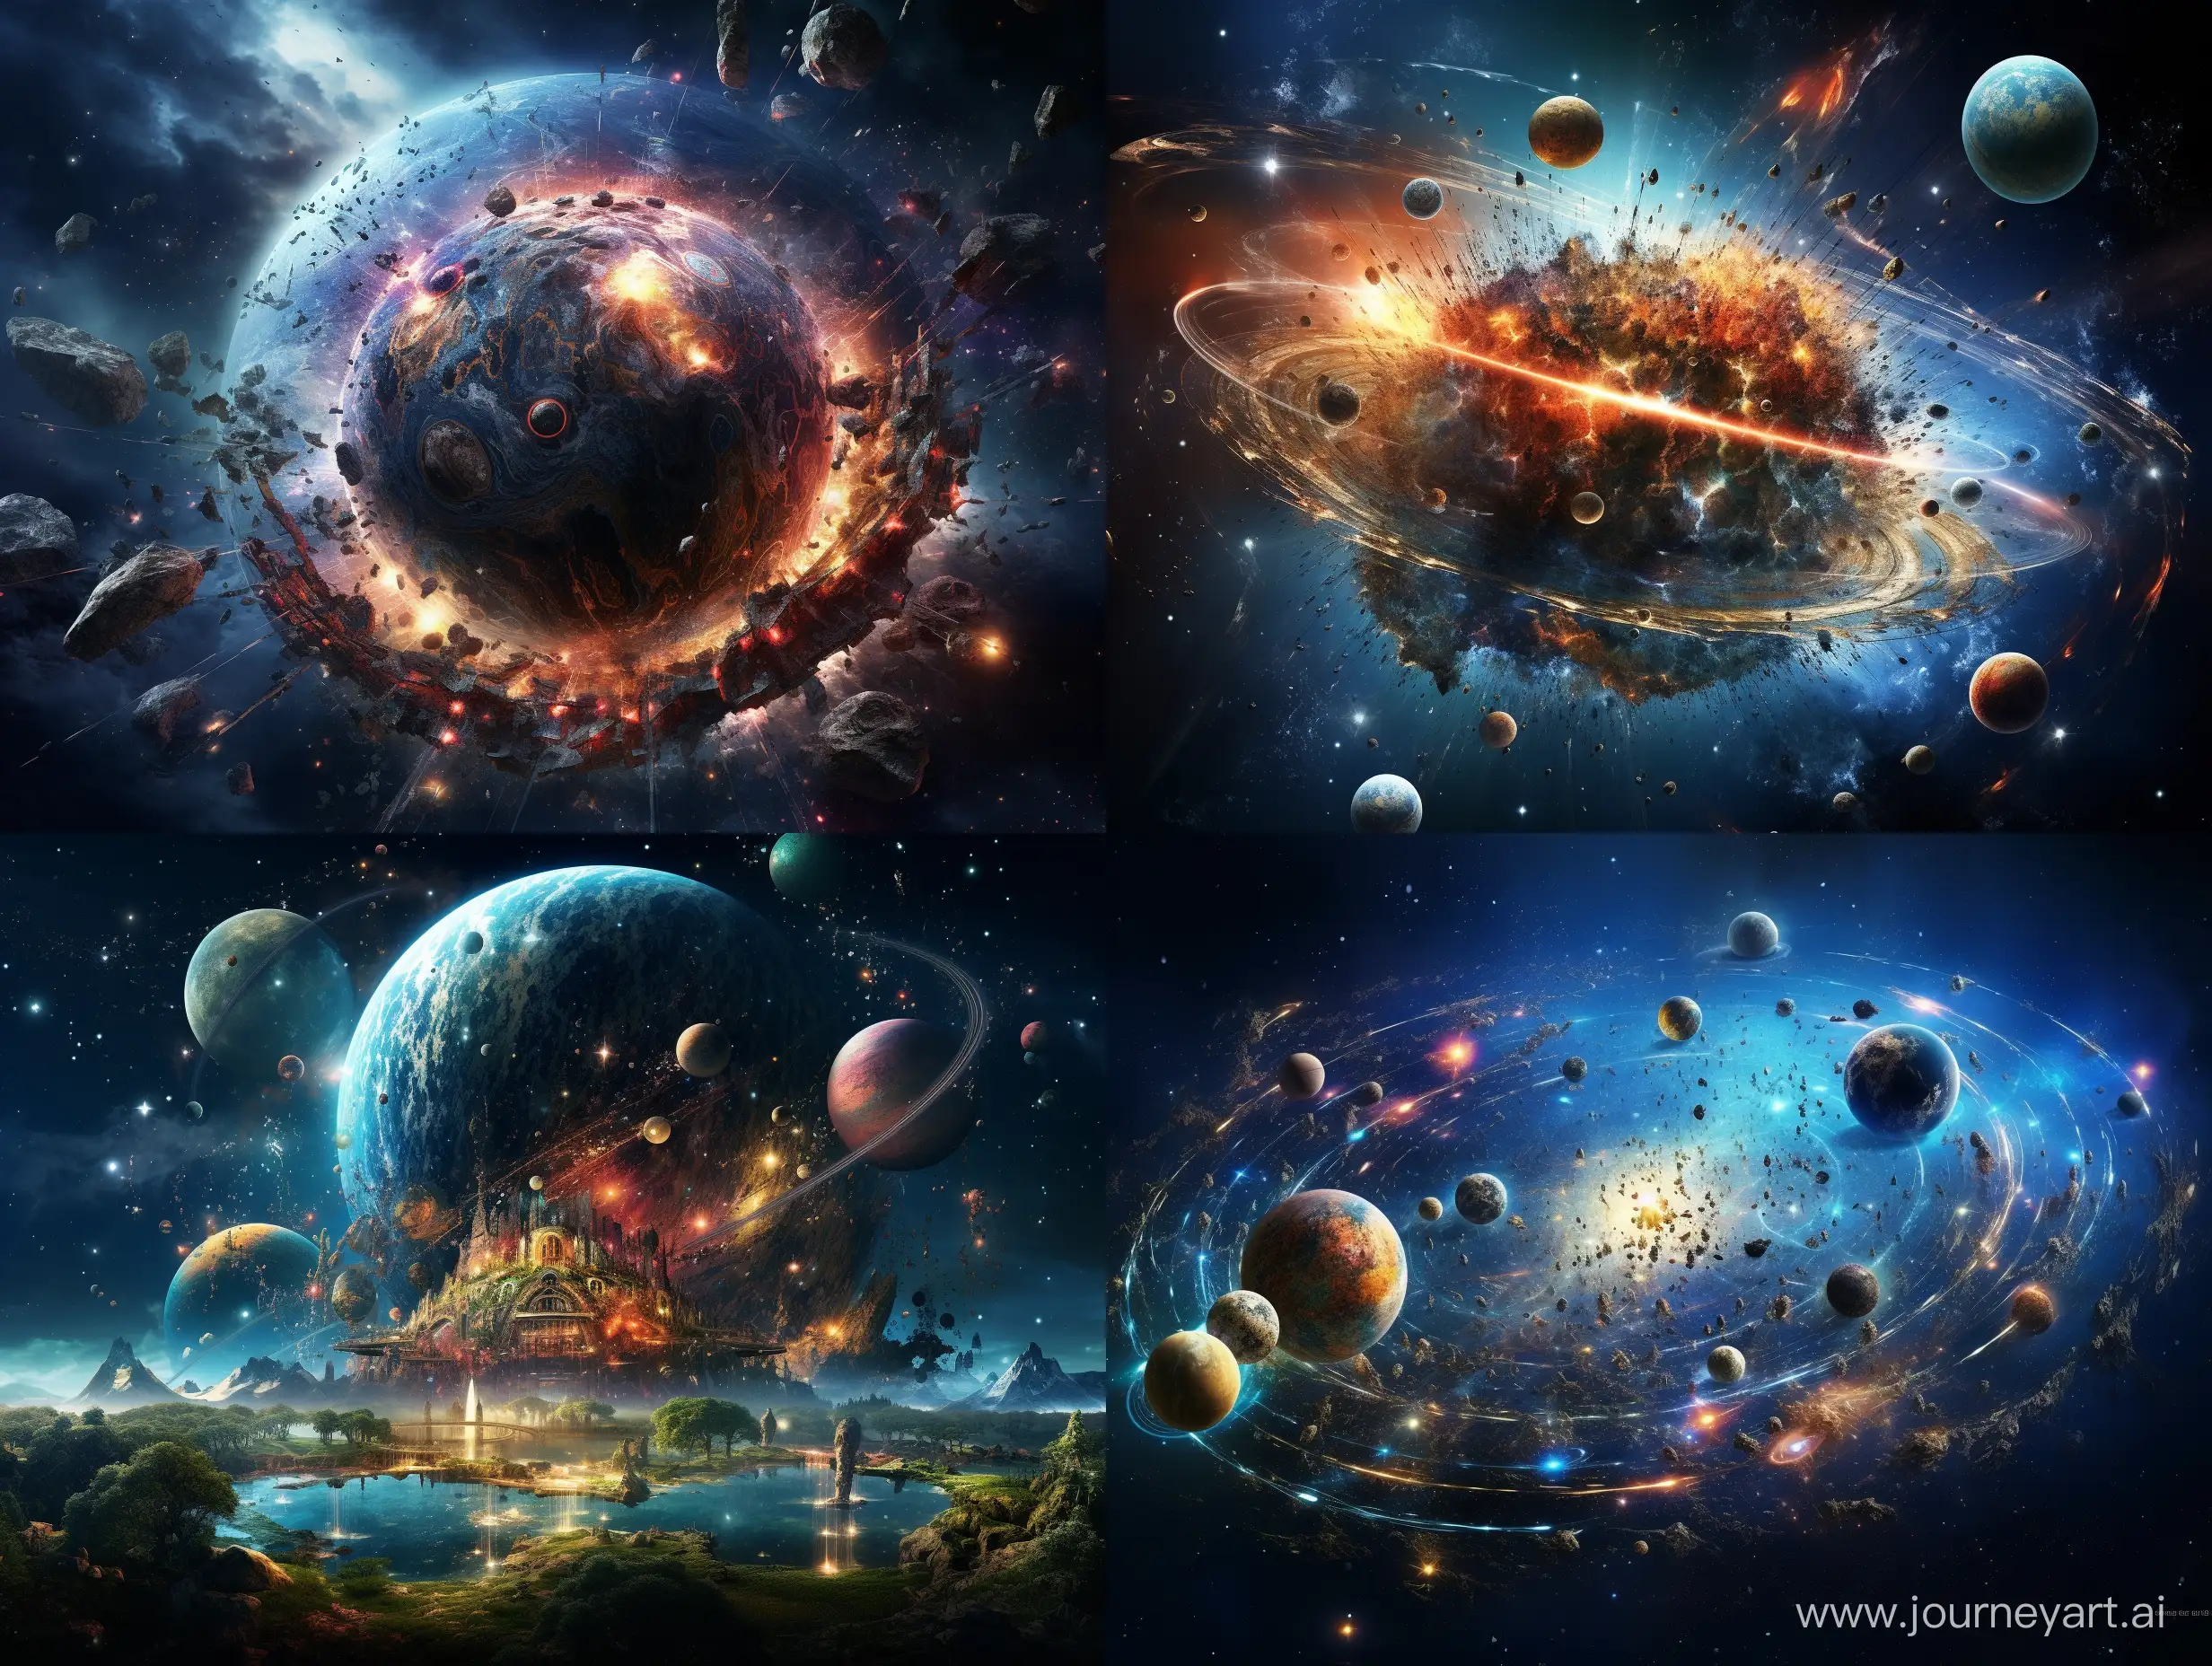 planet in space, the planet is shown in section, inside the section various events - life on the planet - war, development, around the planet flows of information - various symbols, high quality